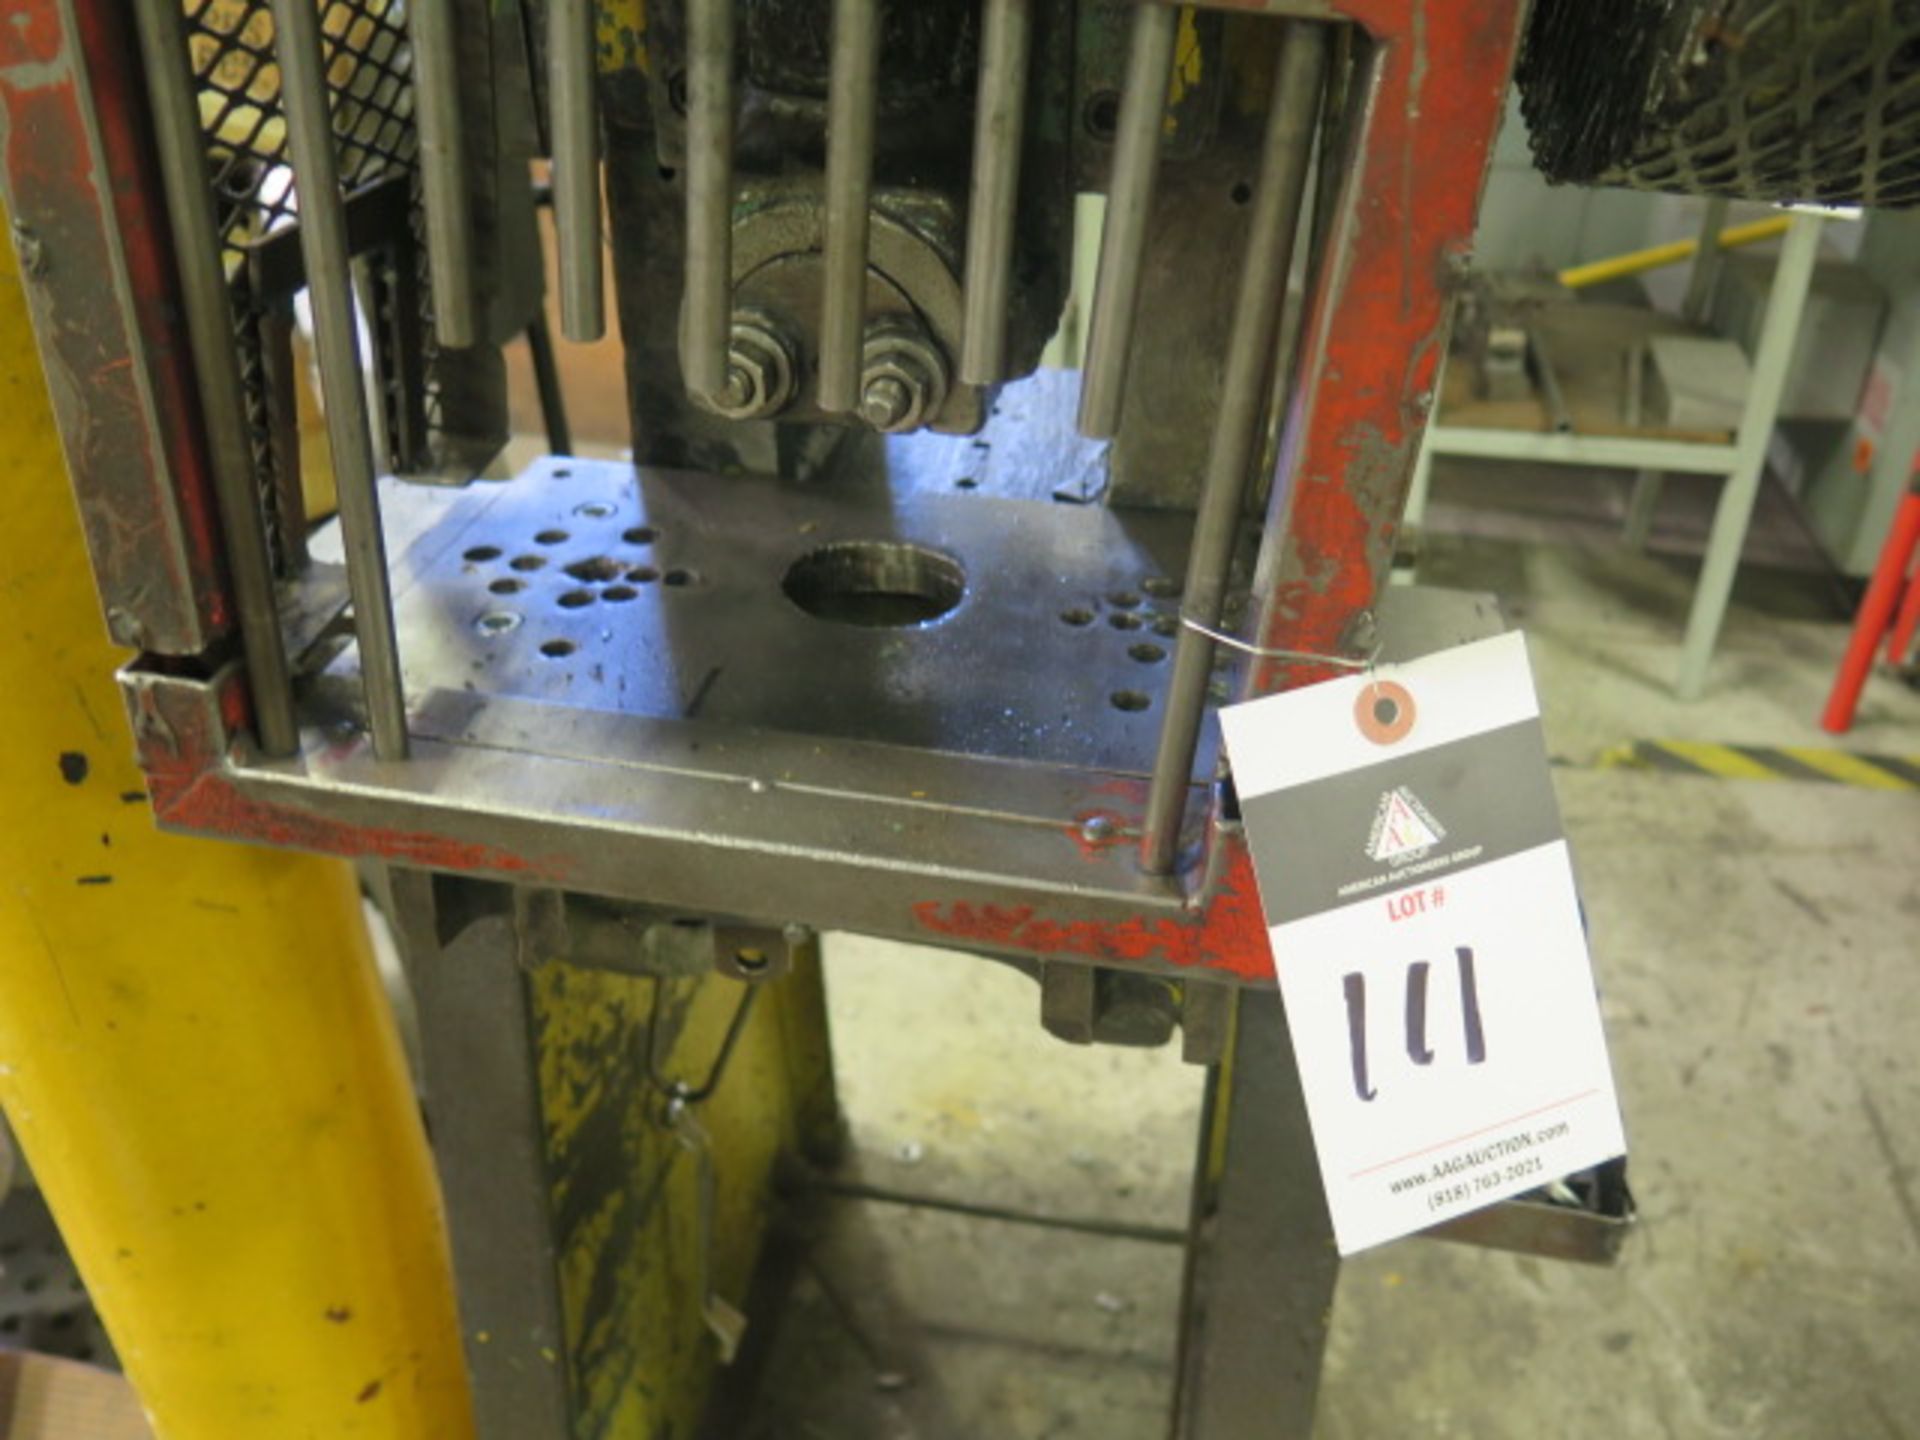 Niagara A1 1/4 7 1/2" Ton OBI Stamping Press (AS IS - PARTS ONLY) - Image 5 of 6